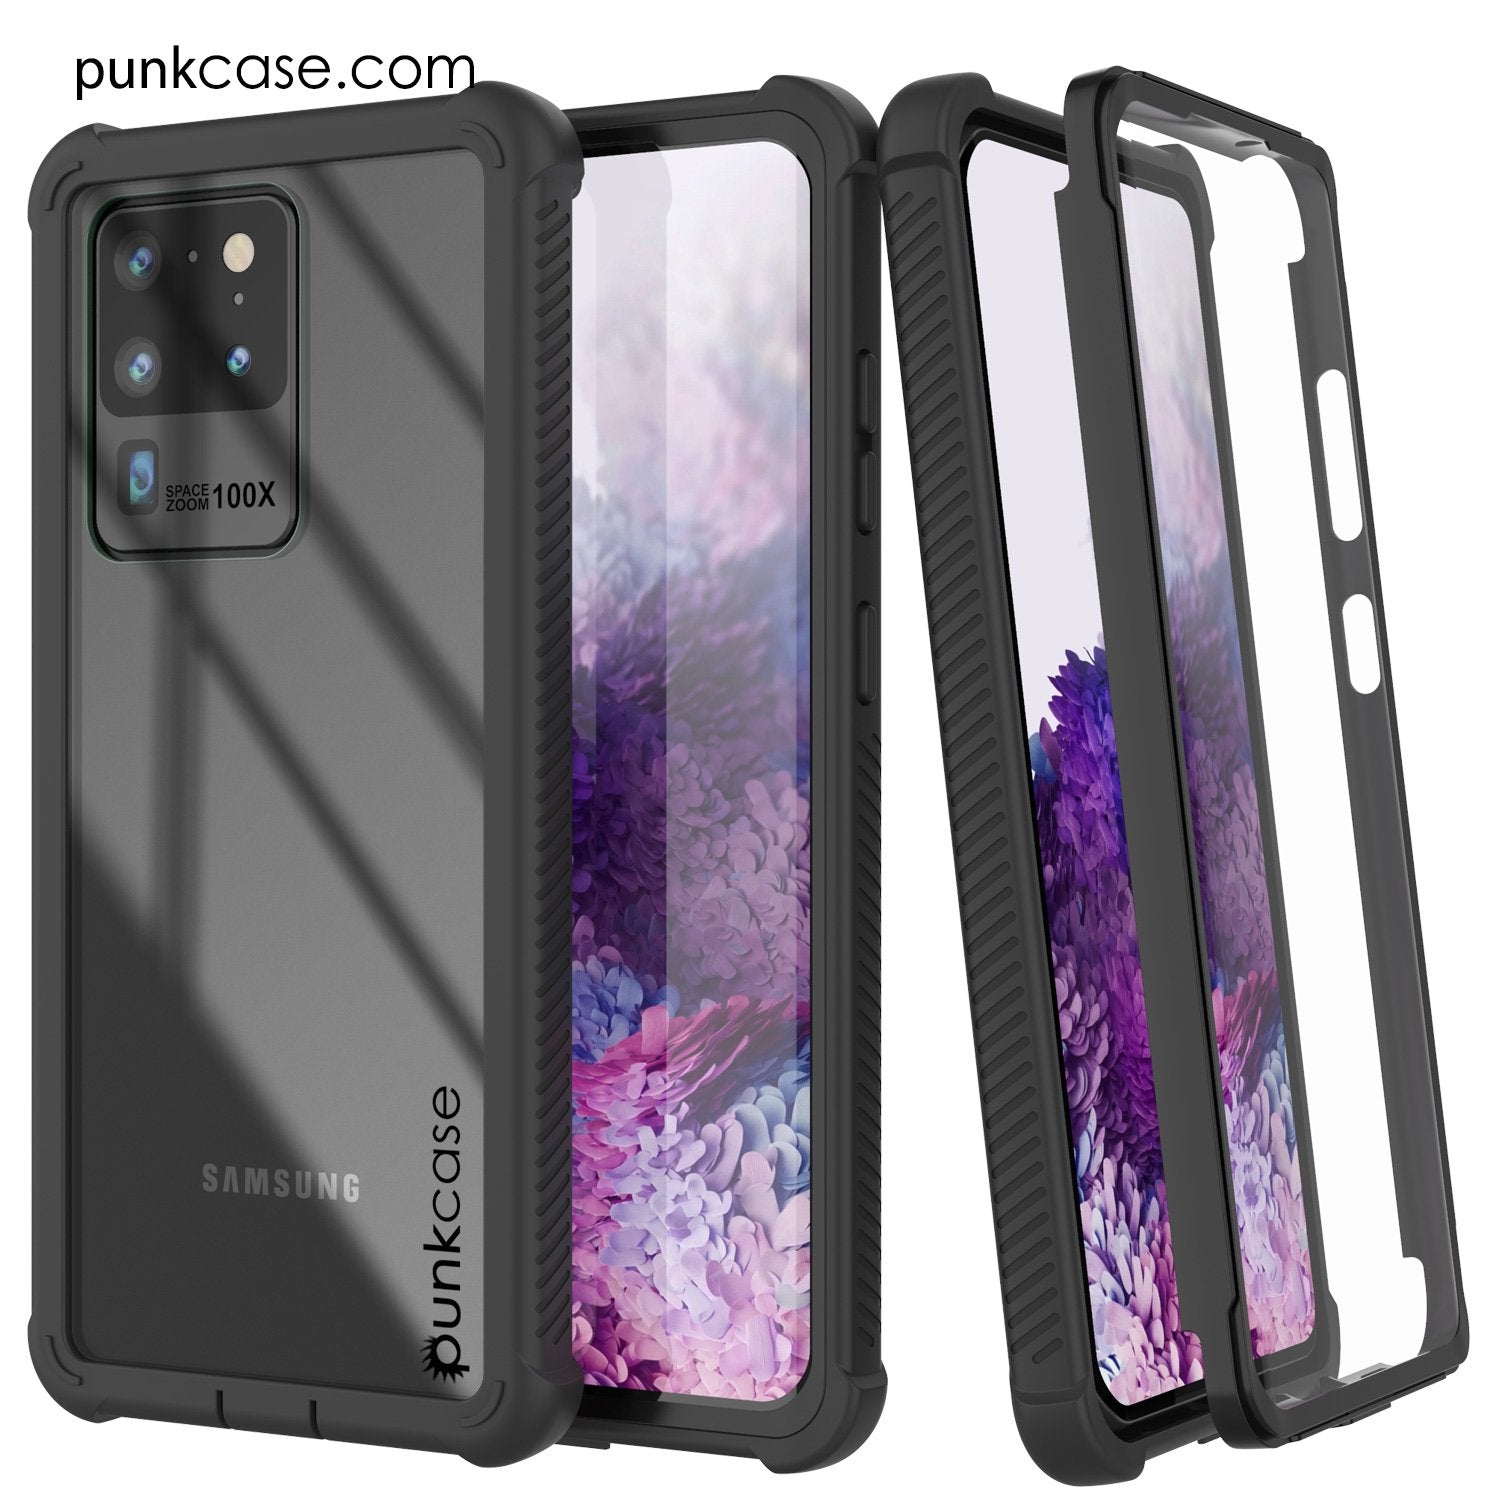 PunkCase Galaxy S20 Ultra Case, [Spartan Series] Clear Rugged Heavy Duty Cover W/Built in Screen Protector [Black]